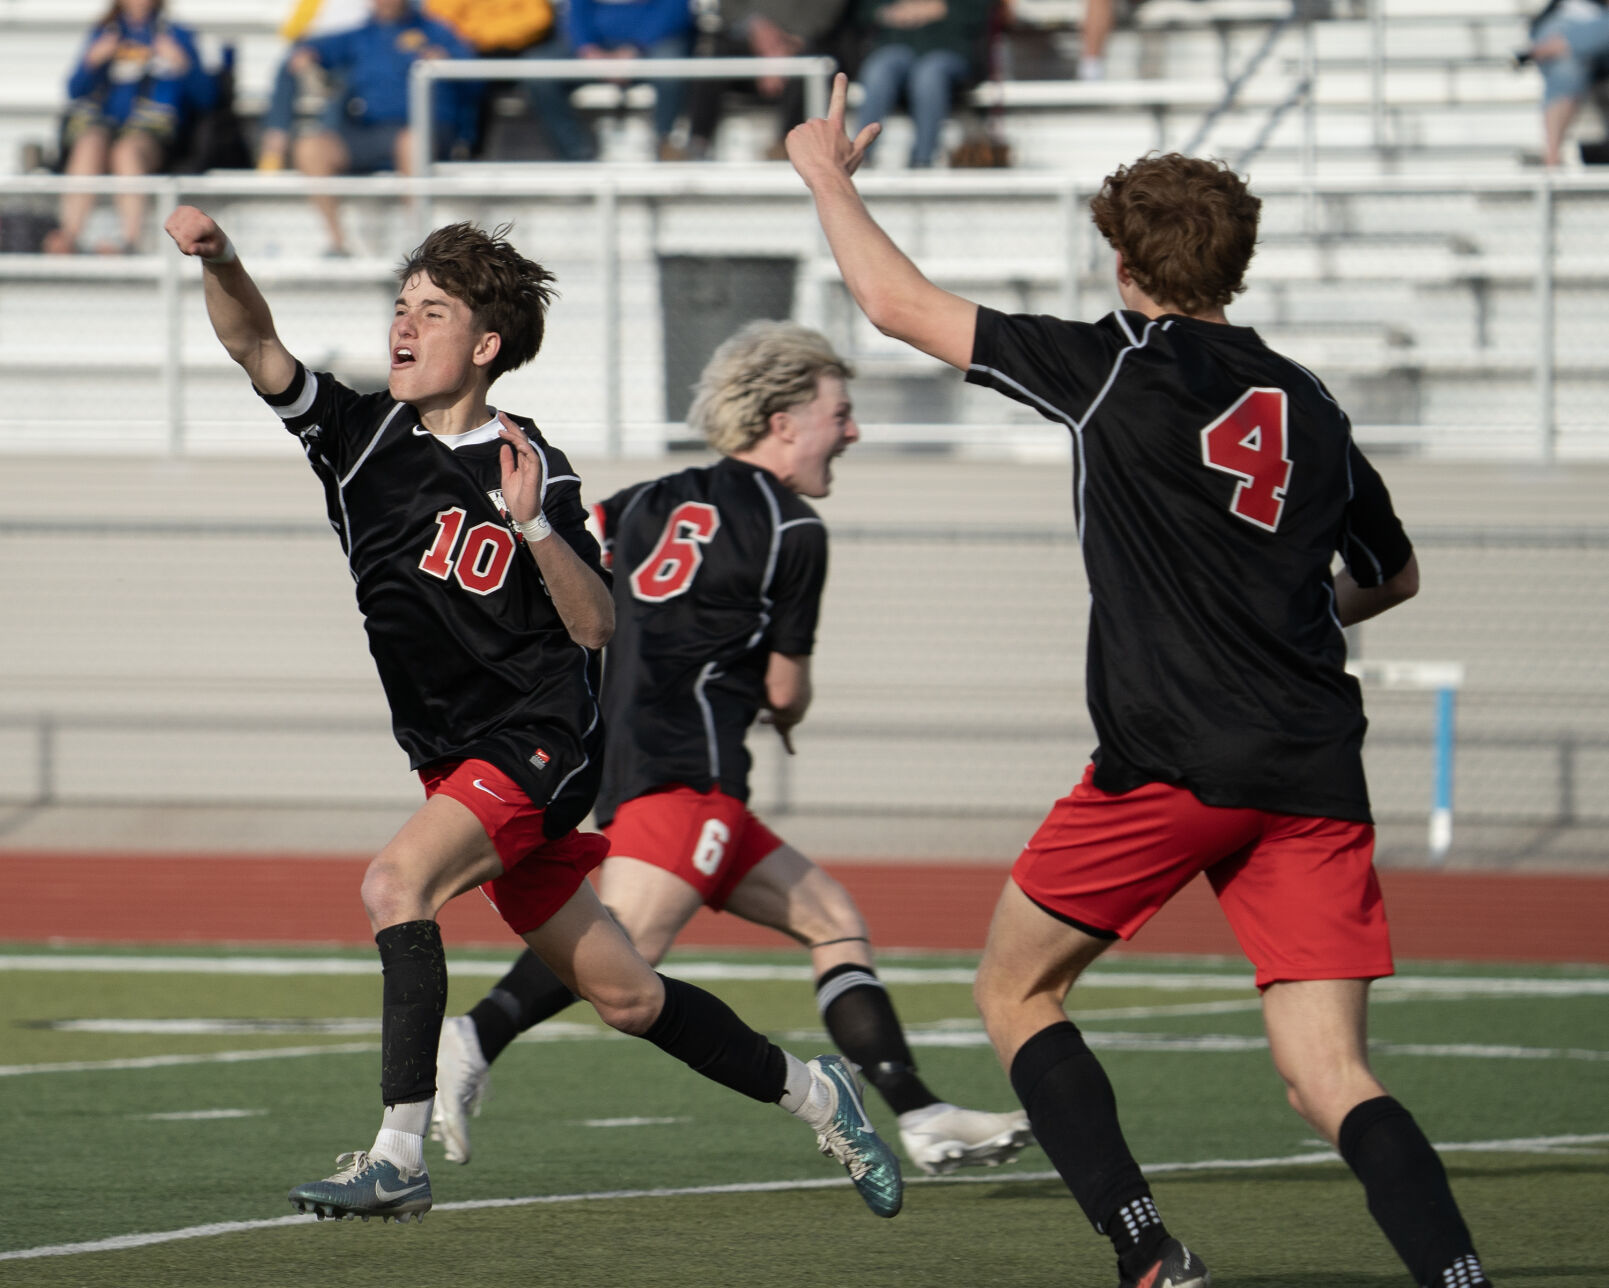 Cheyenne Central Wins Conference Title with Cone-LeBeaumont’s Buzzer-Beater Goal